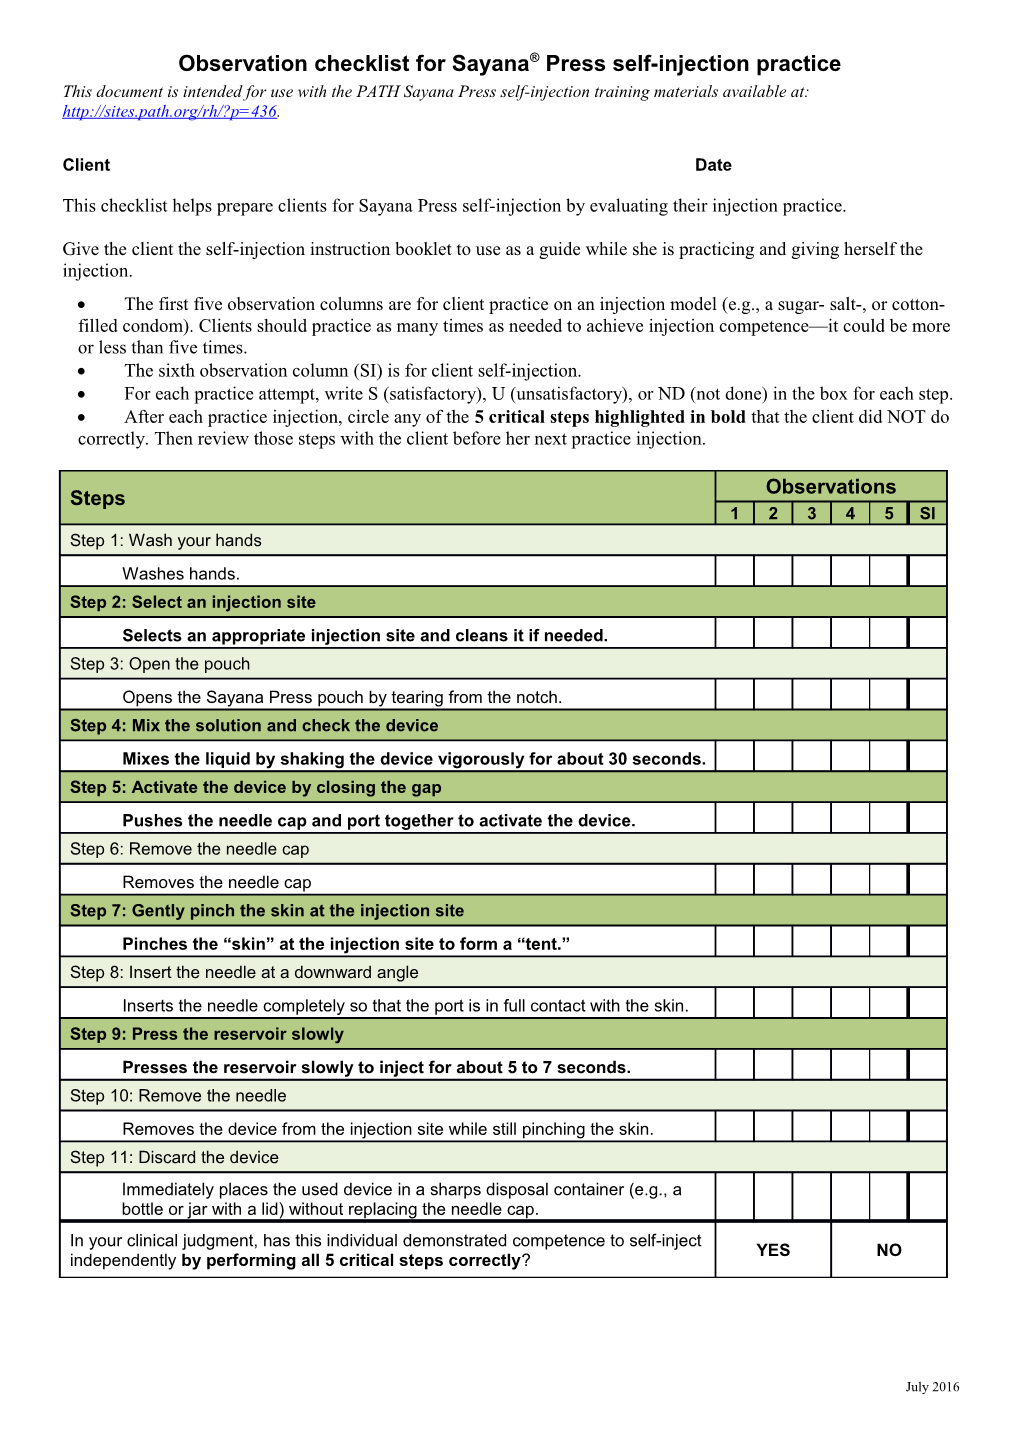 Observation Checklist for Sayana Press Self-Injection Practice